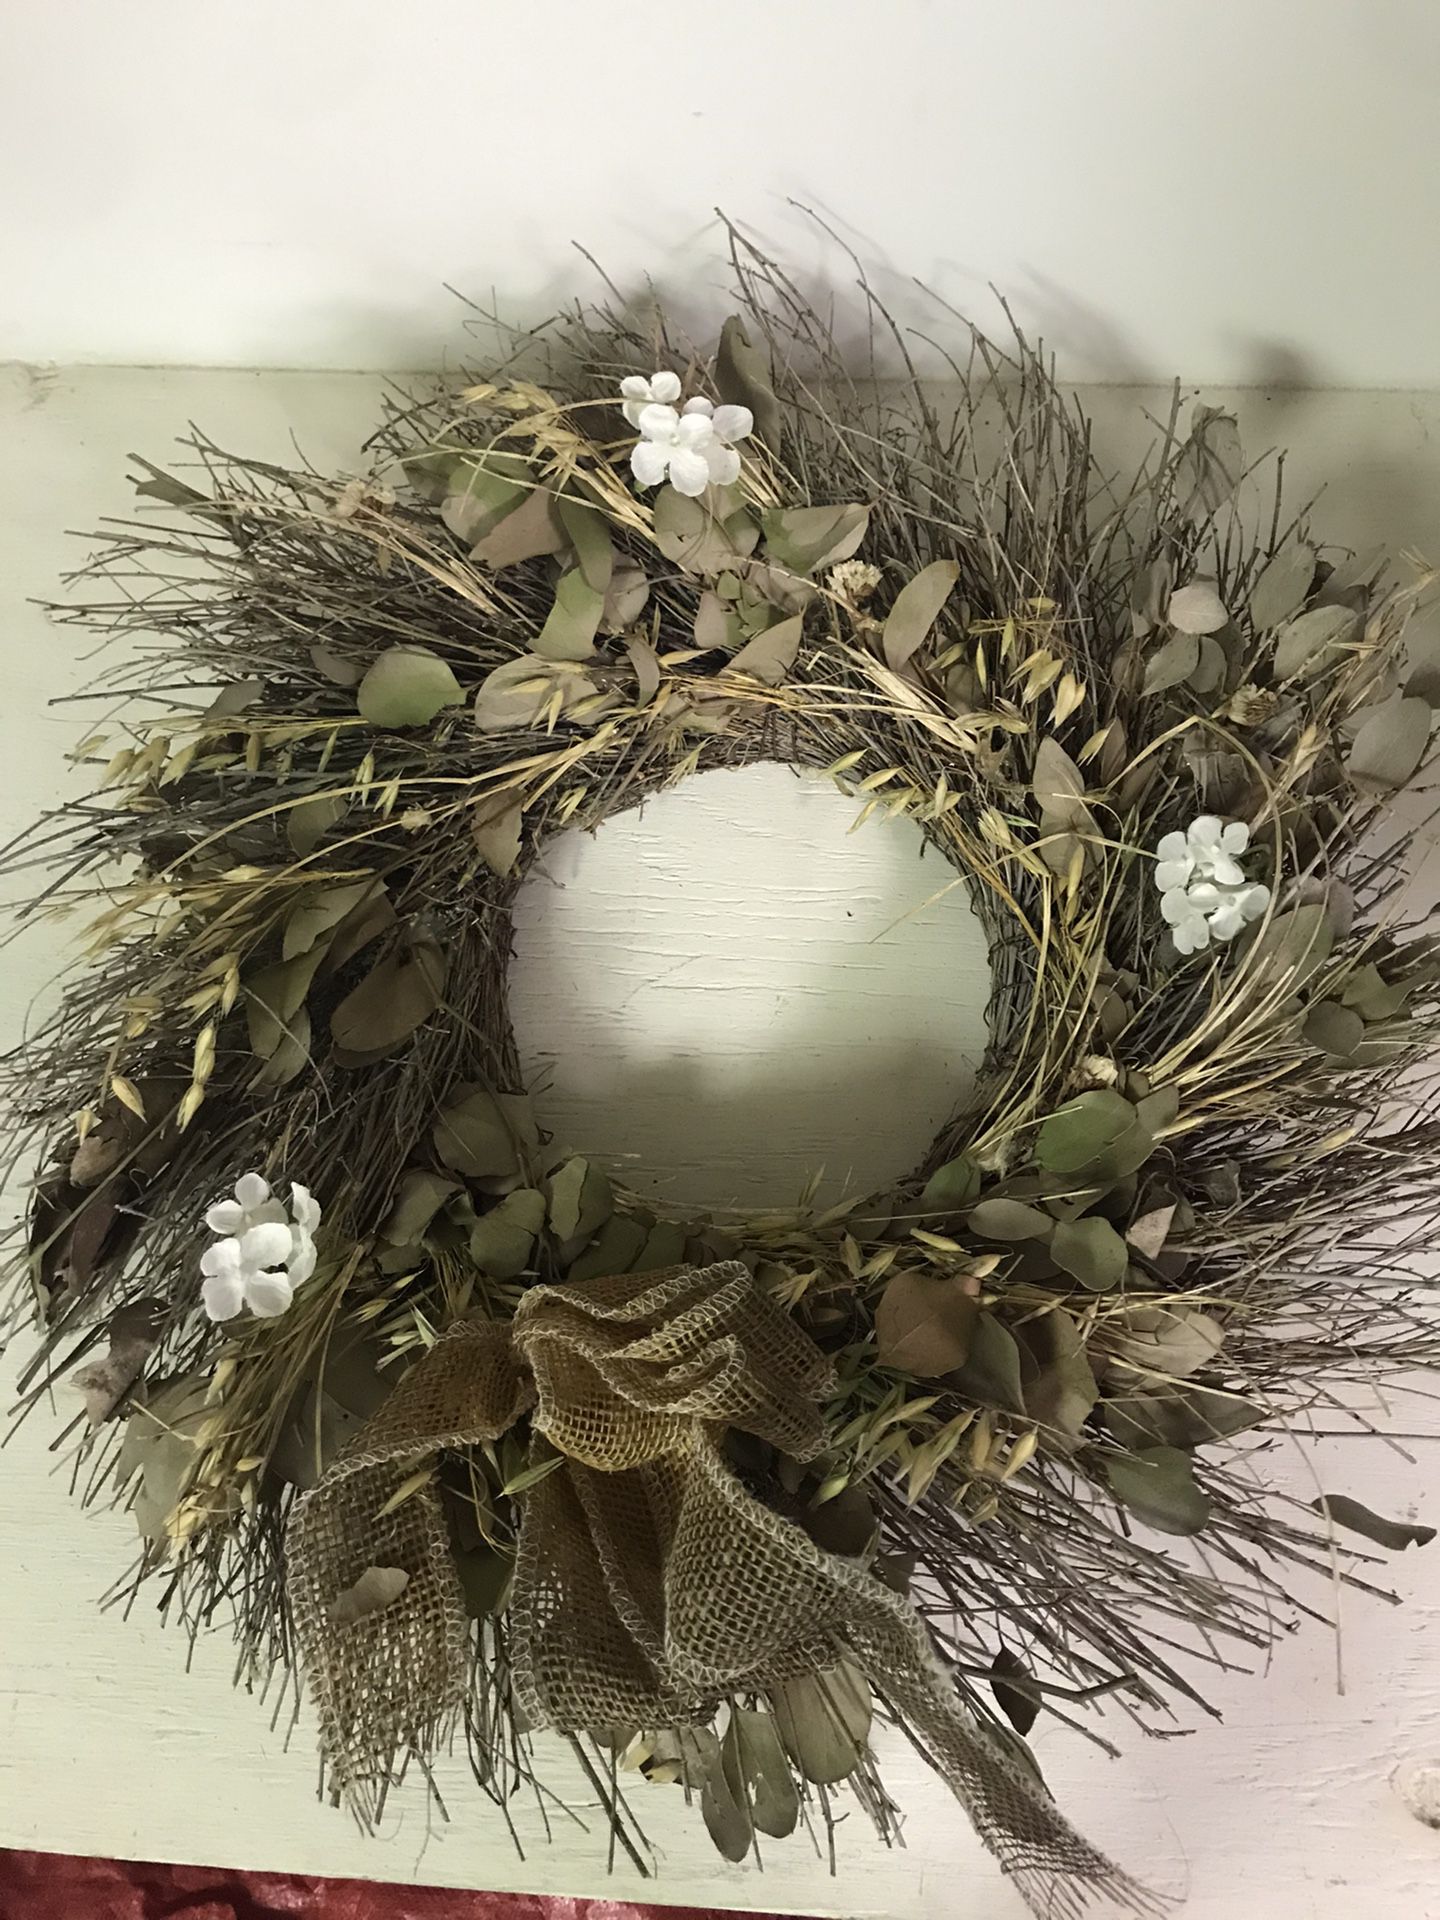 Wreath - Dried leaves and sticks